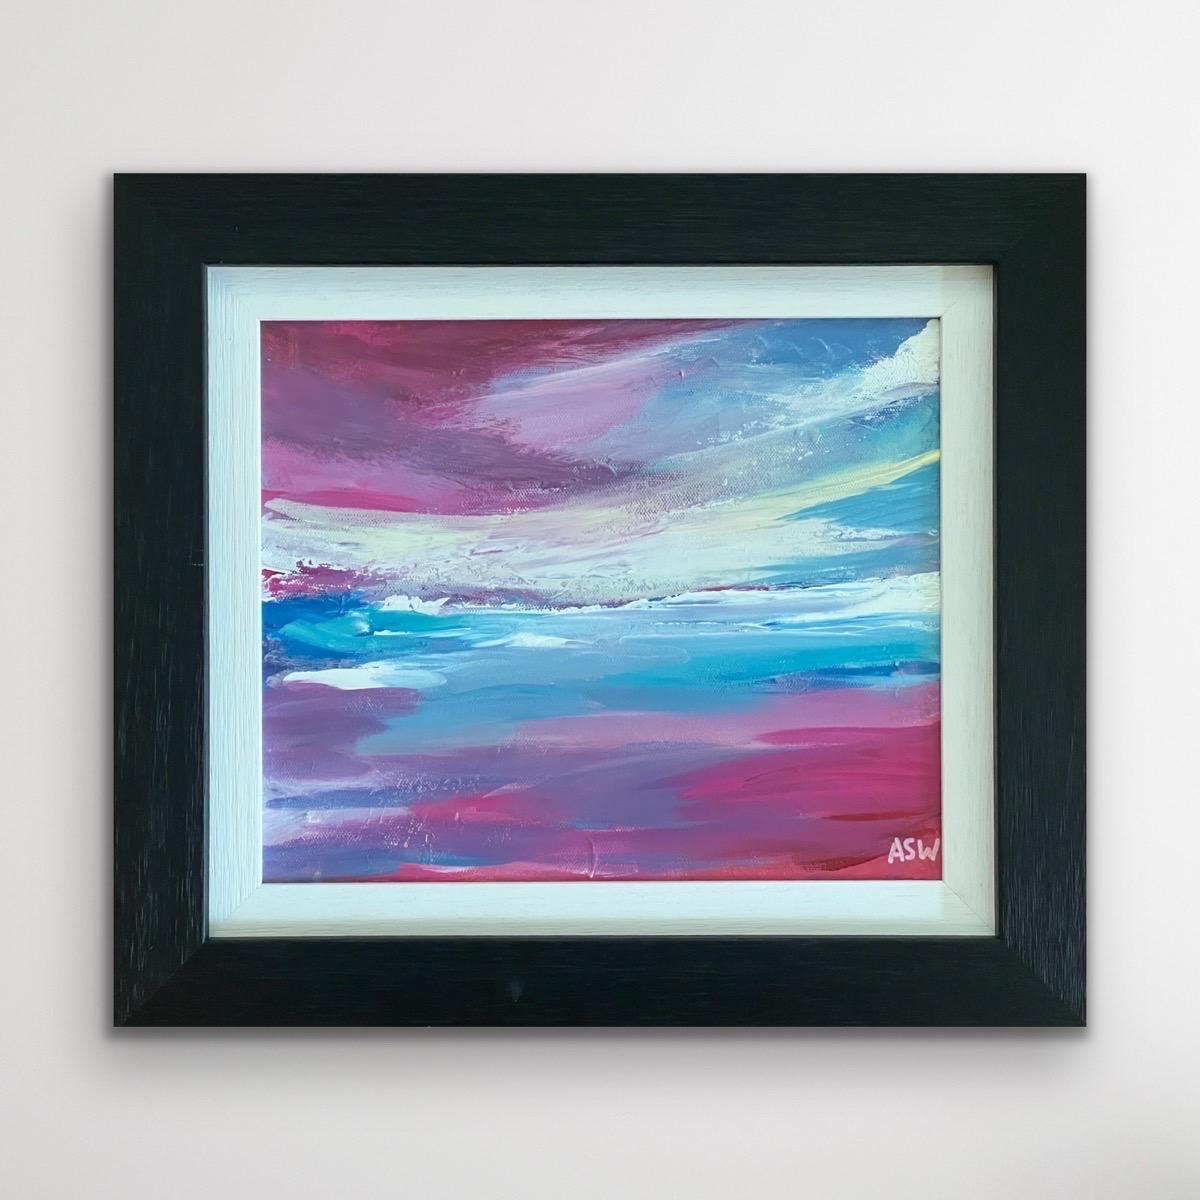 Abstract Landscape Seascape Painting with Pink & Blue Sky by Leading British Painter, Angela Wakefield

Art measures 12 x 10 inches
Frame measures 17 x 15 inches

Angela Wakefield has twice been on the front cover of ‘Art of England’ and featured in